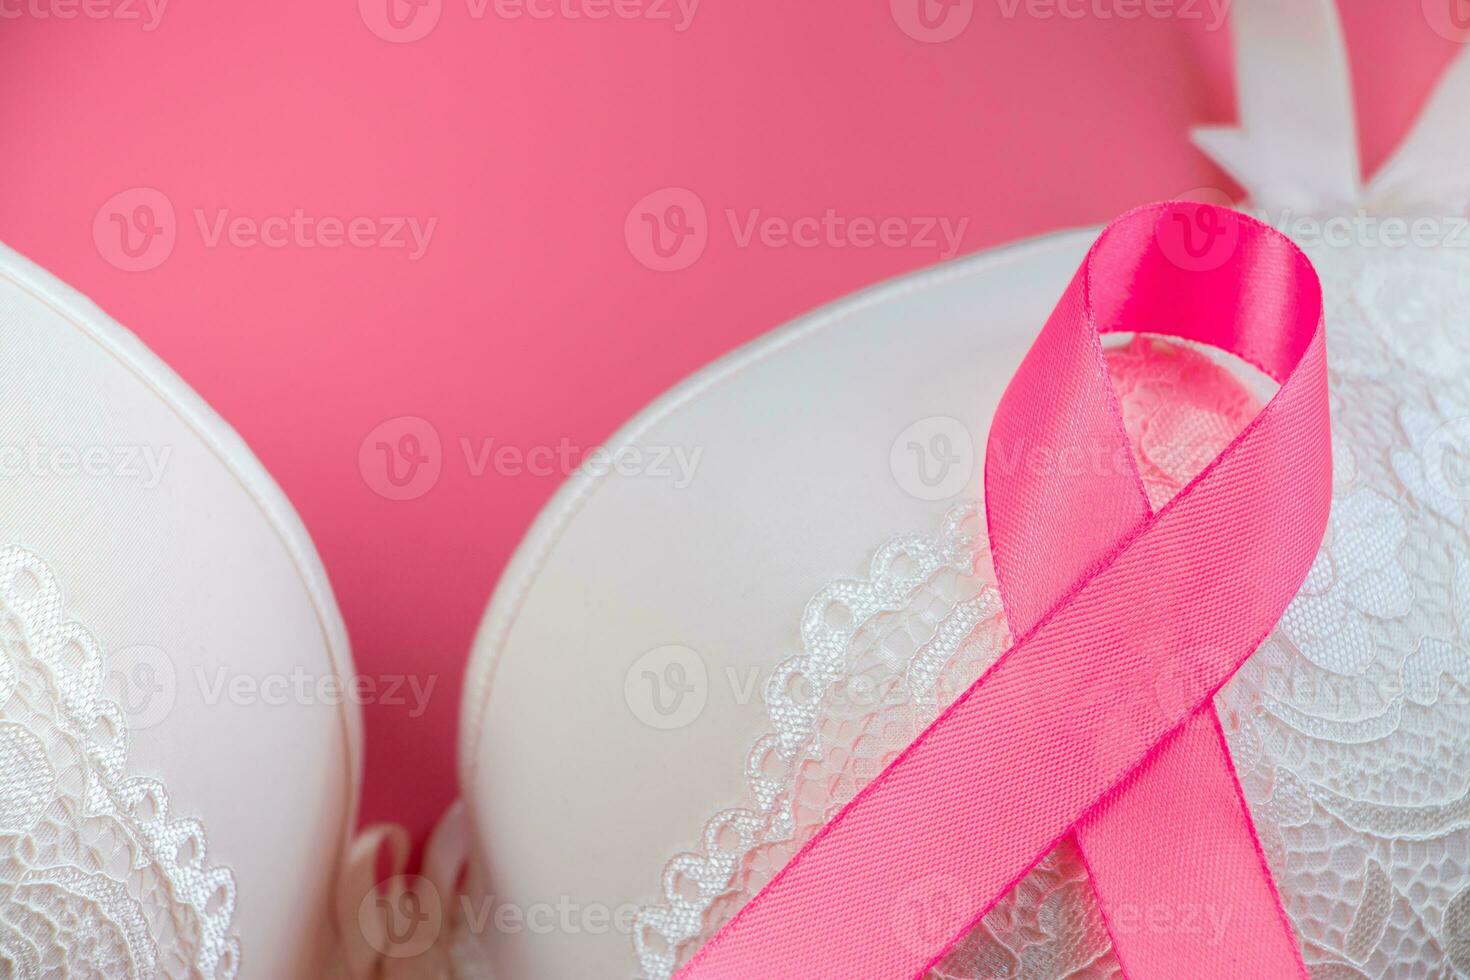 Top View Of Brassiere On Pink Background, Free Stock Photo and Image  275830526